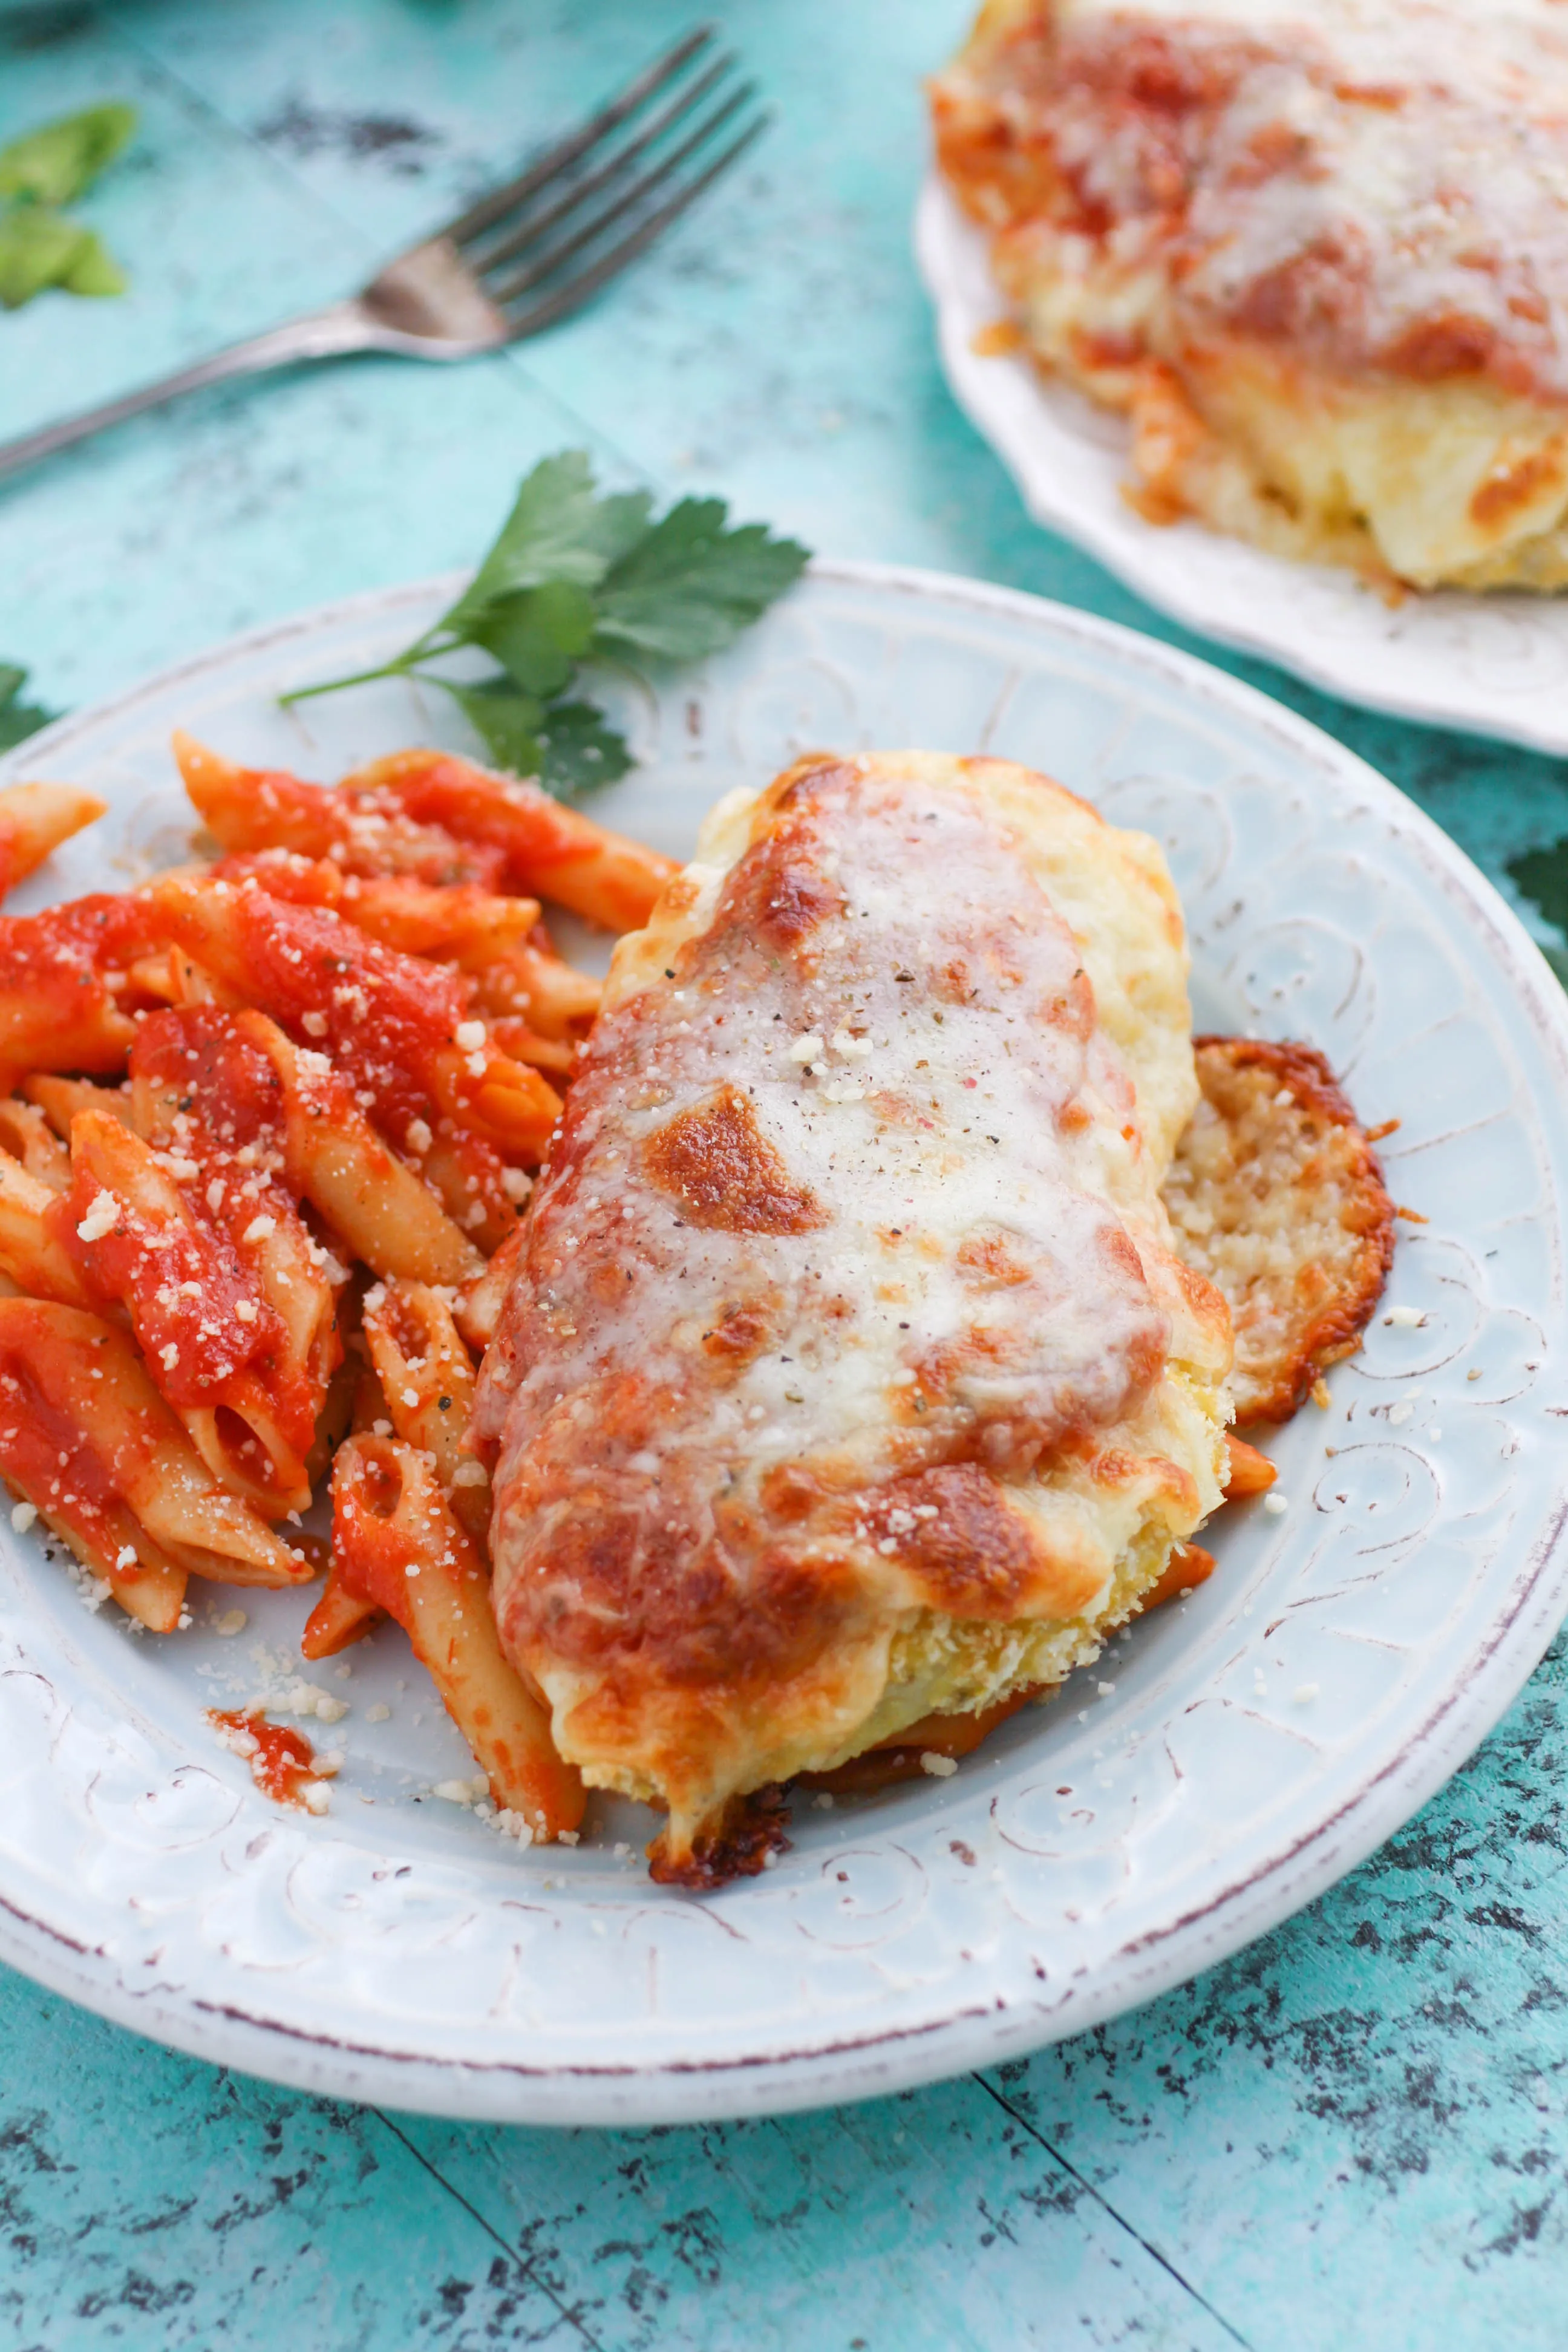 Classic Baked Chicken Parmesan is a favorite you'll love to serve. Classic Baked Chicken Parmesan is easy to make at home and will become a favorite, for sure!